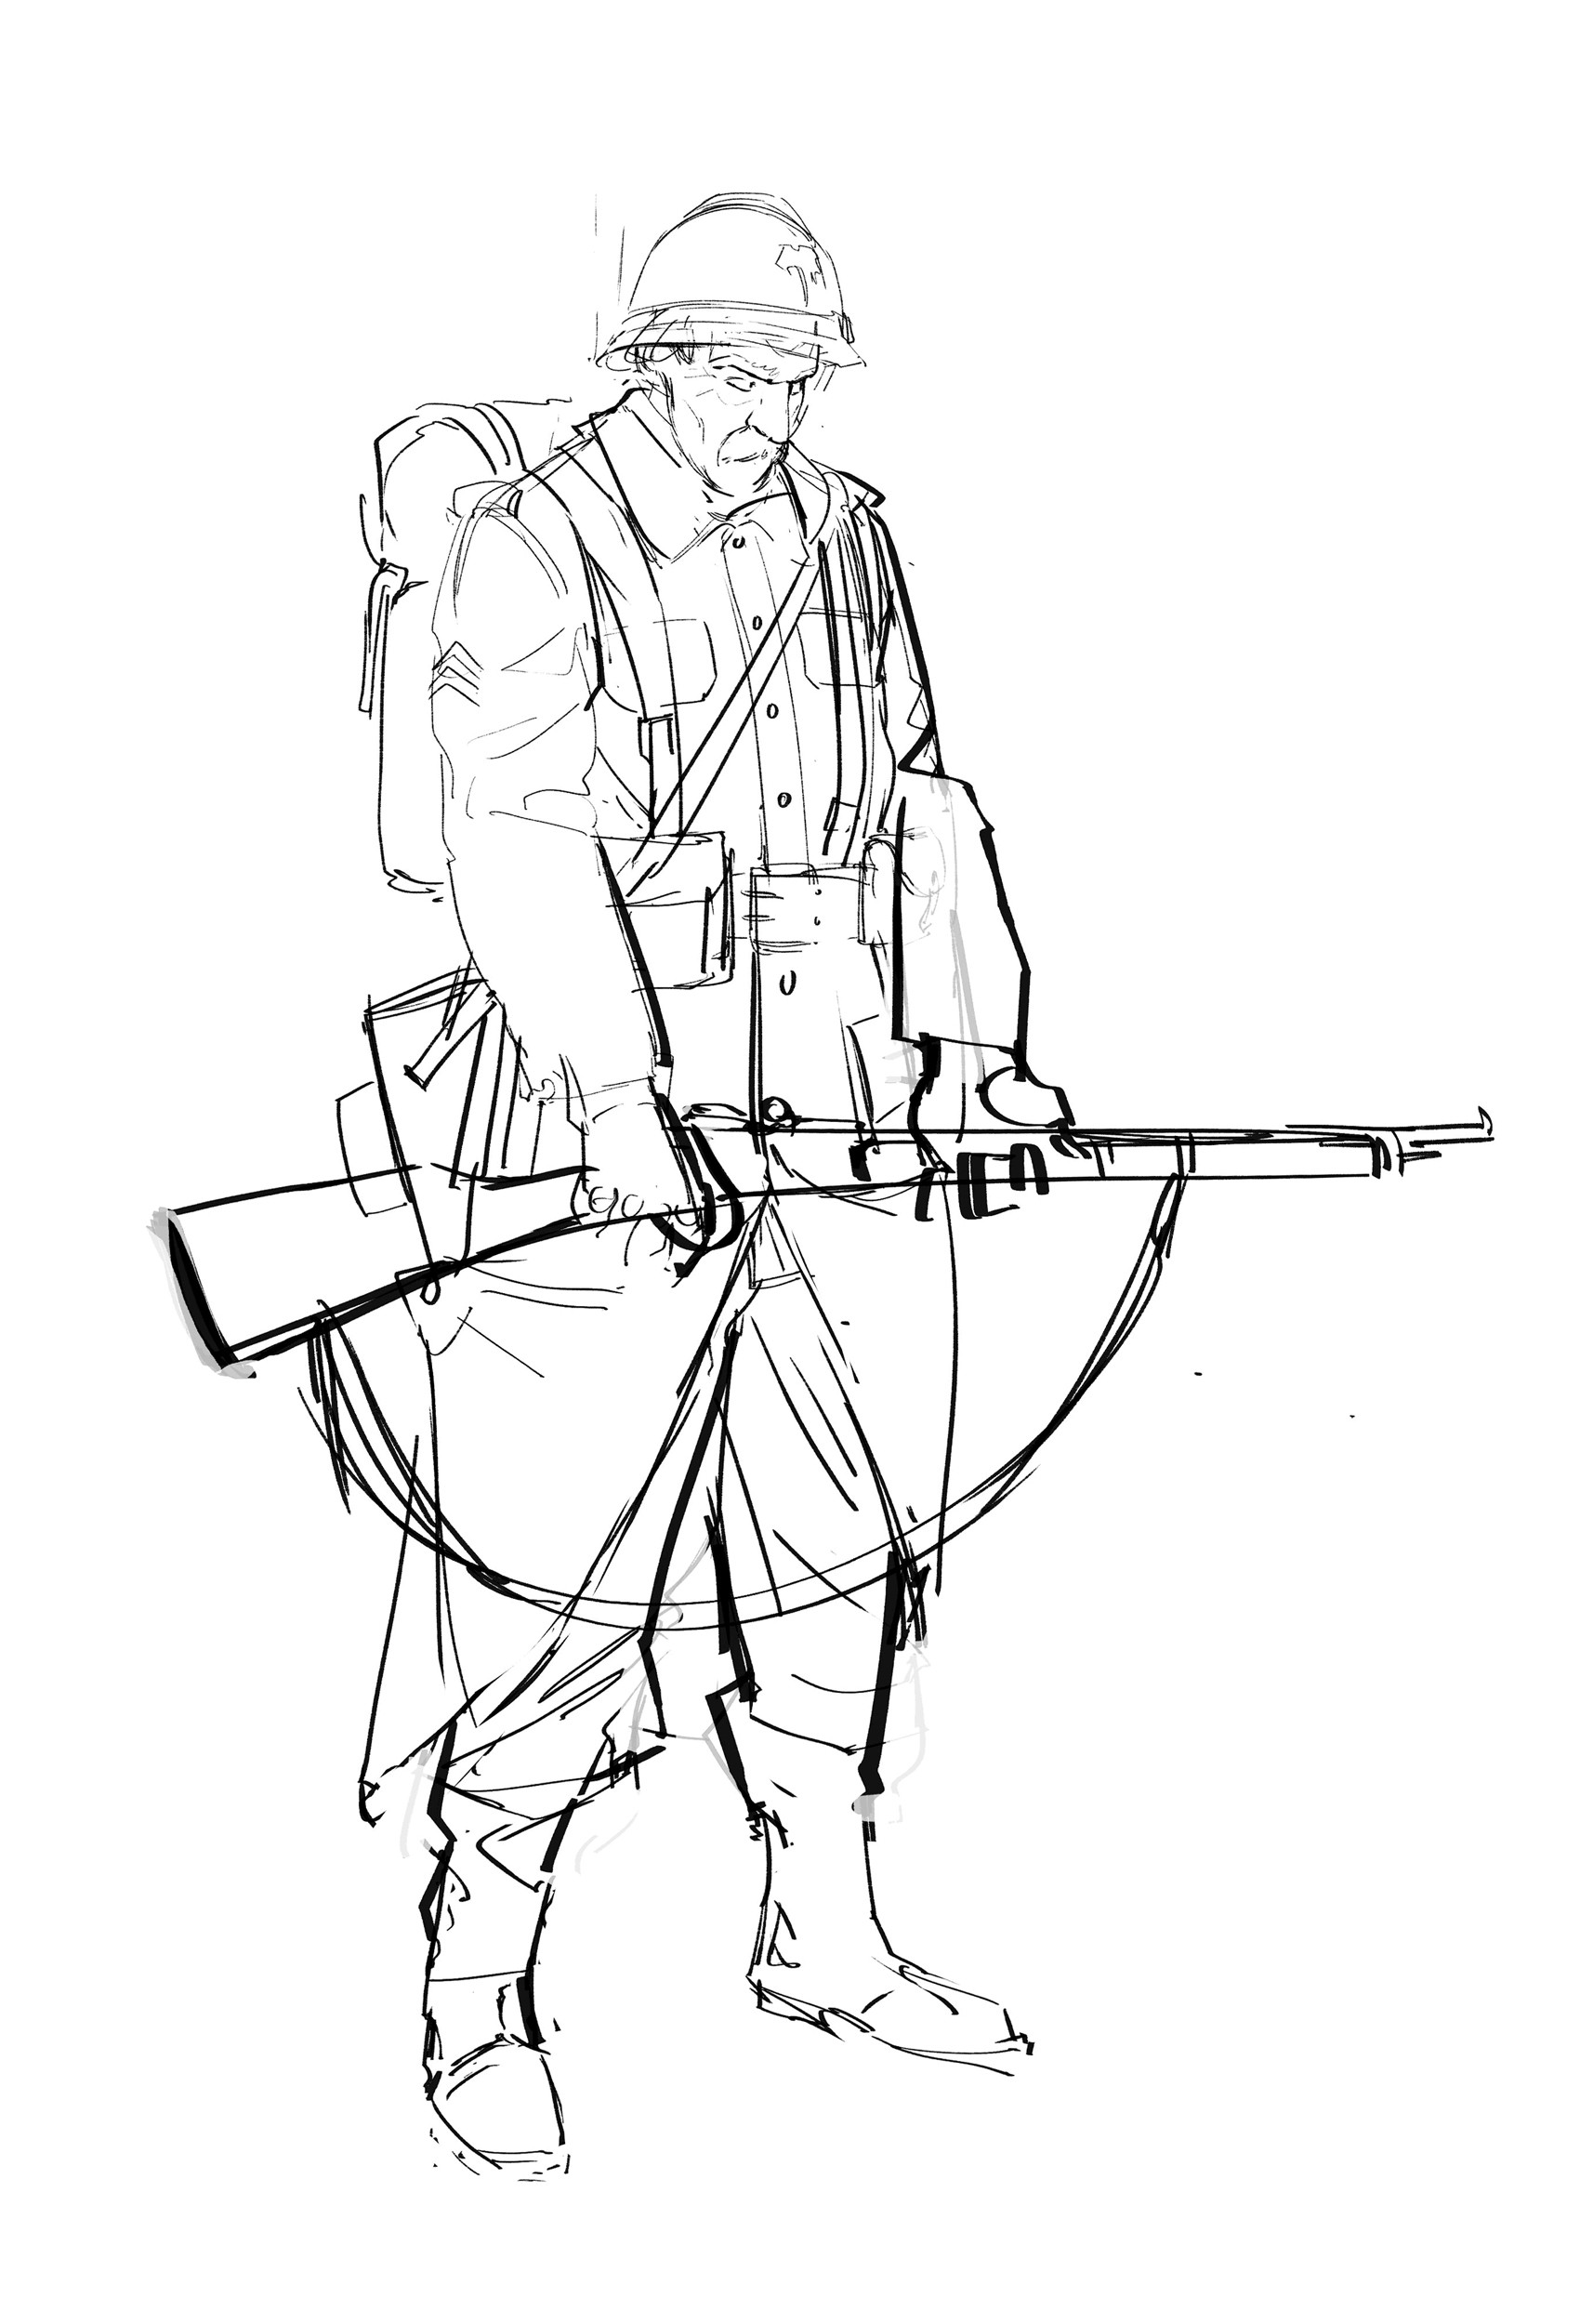 Ww1 Soldier Coloring Pages